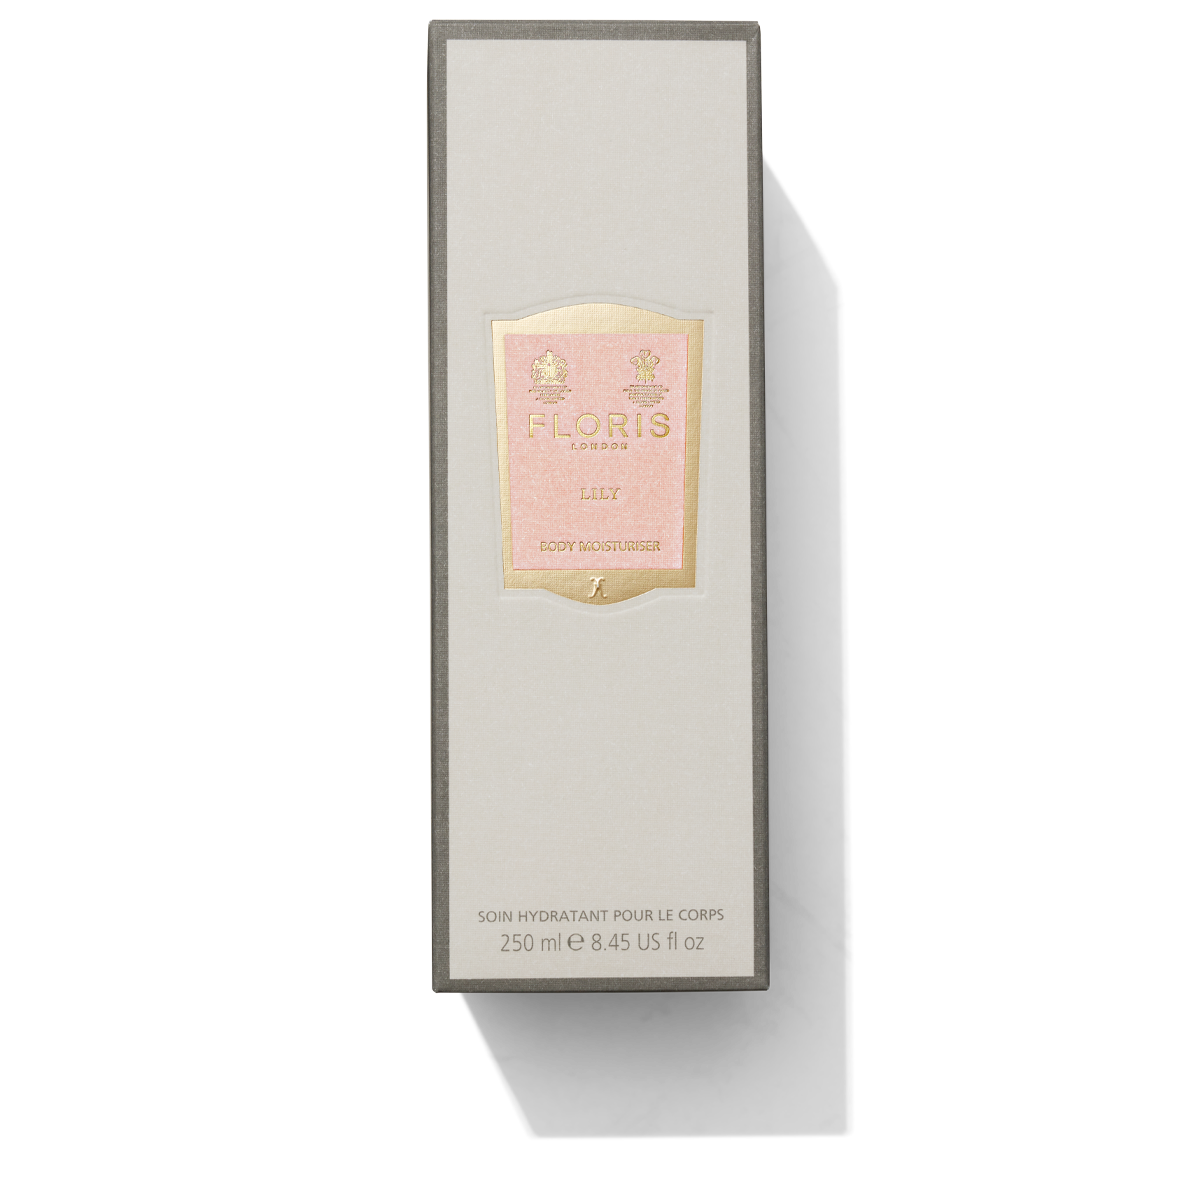 Tall grey box with light pink and gold label containing Lily Body Moisturiser 